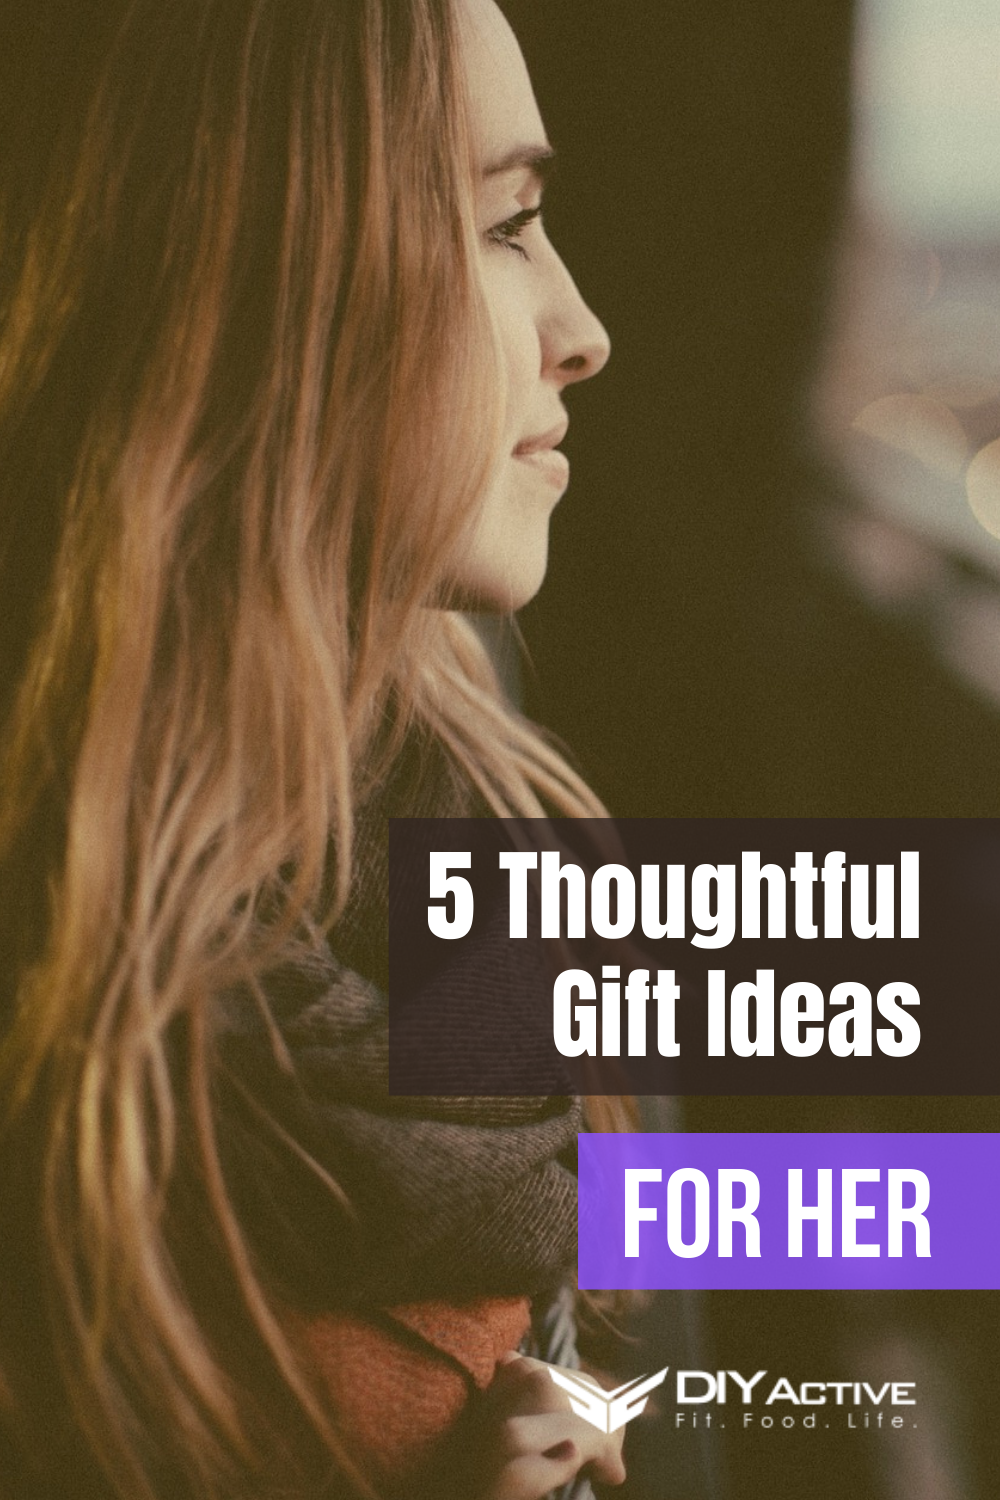 5 Thoughtful Gift Ideas For Her